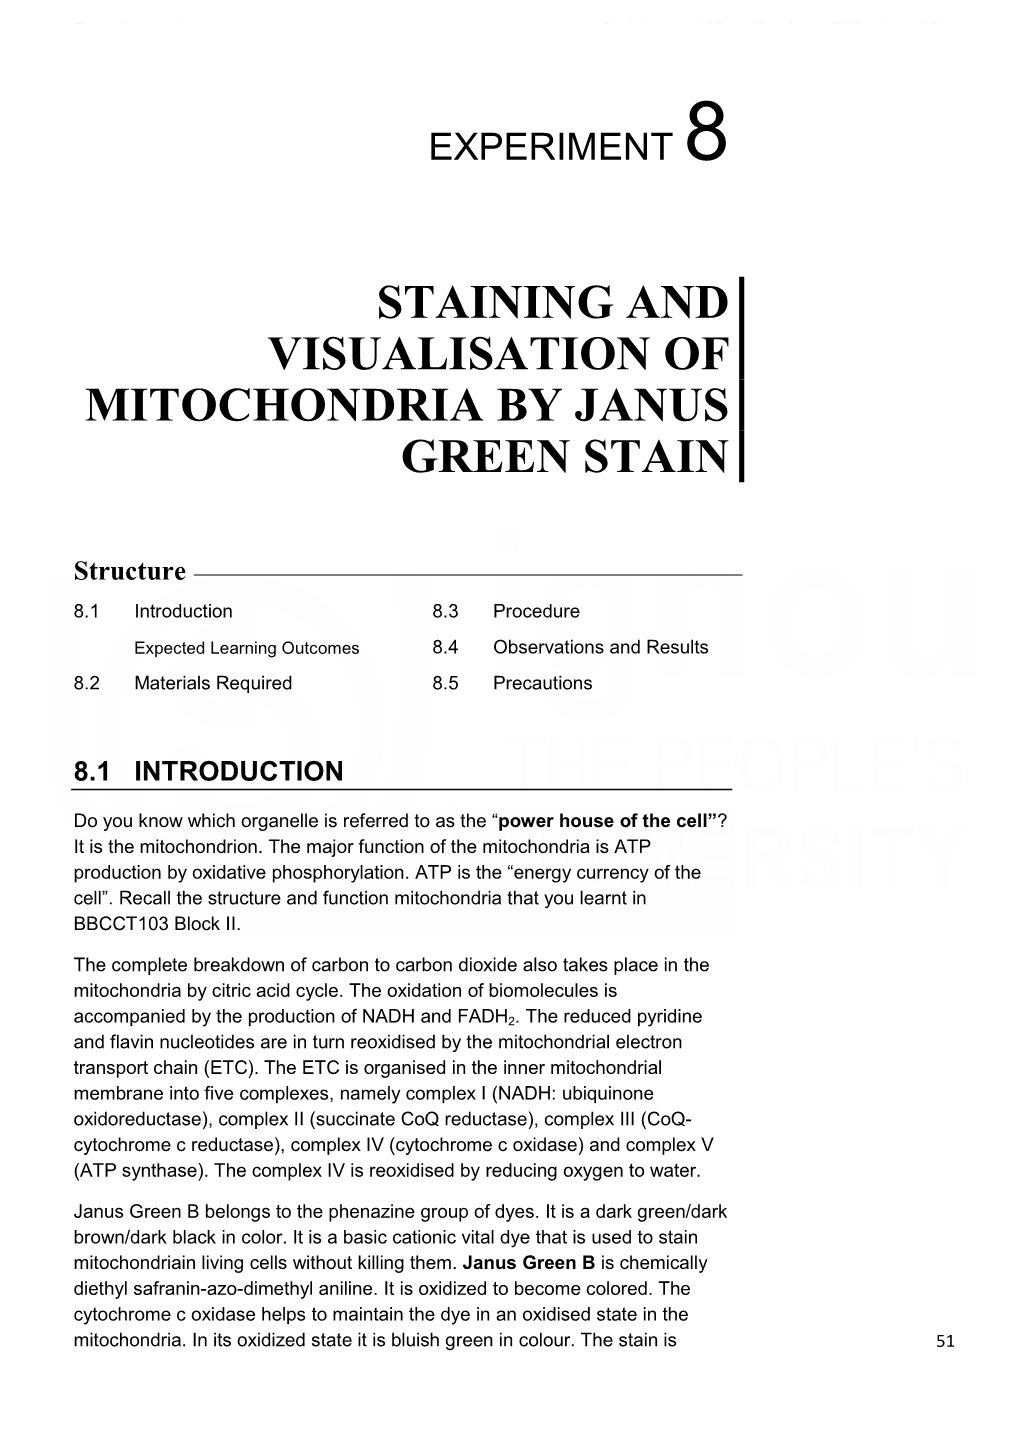 Staining and Visualisation of Mitochondria by Janus Green Stain